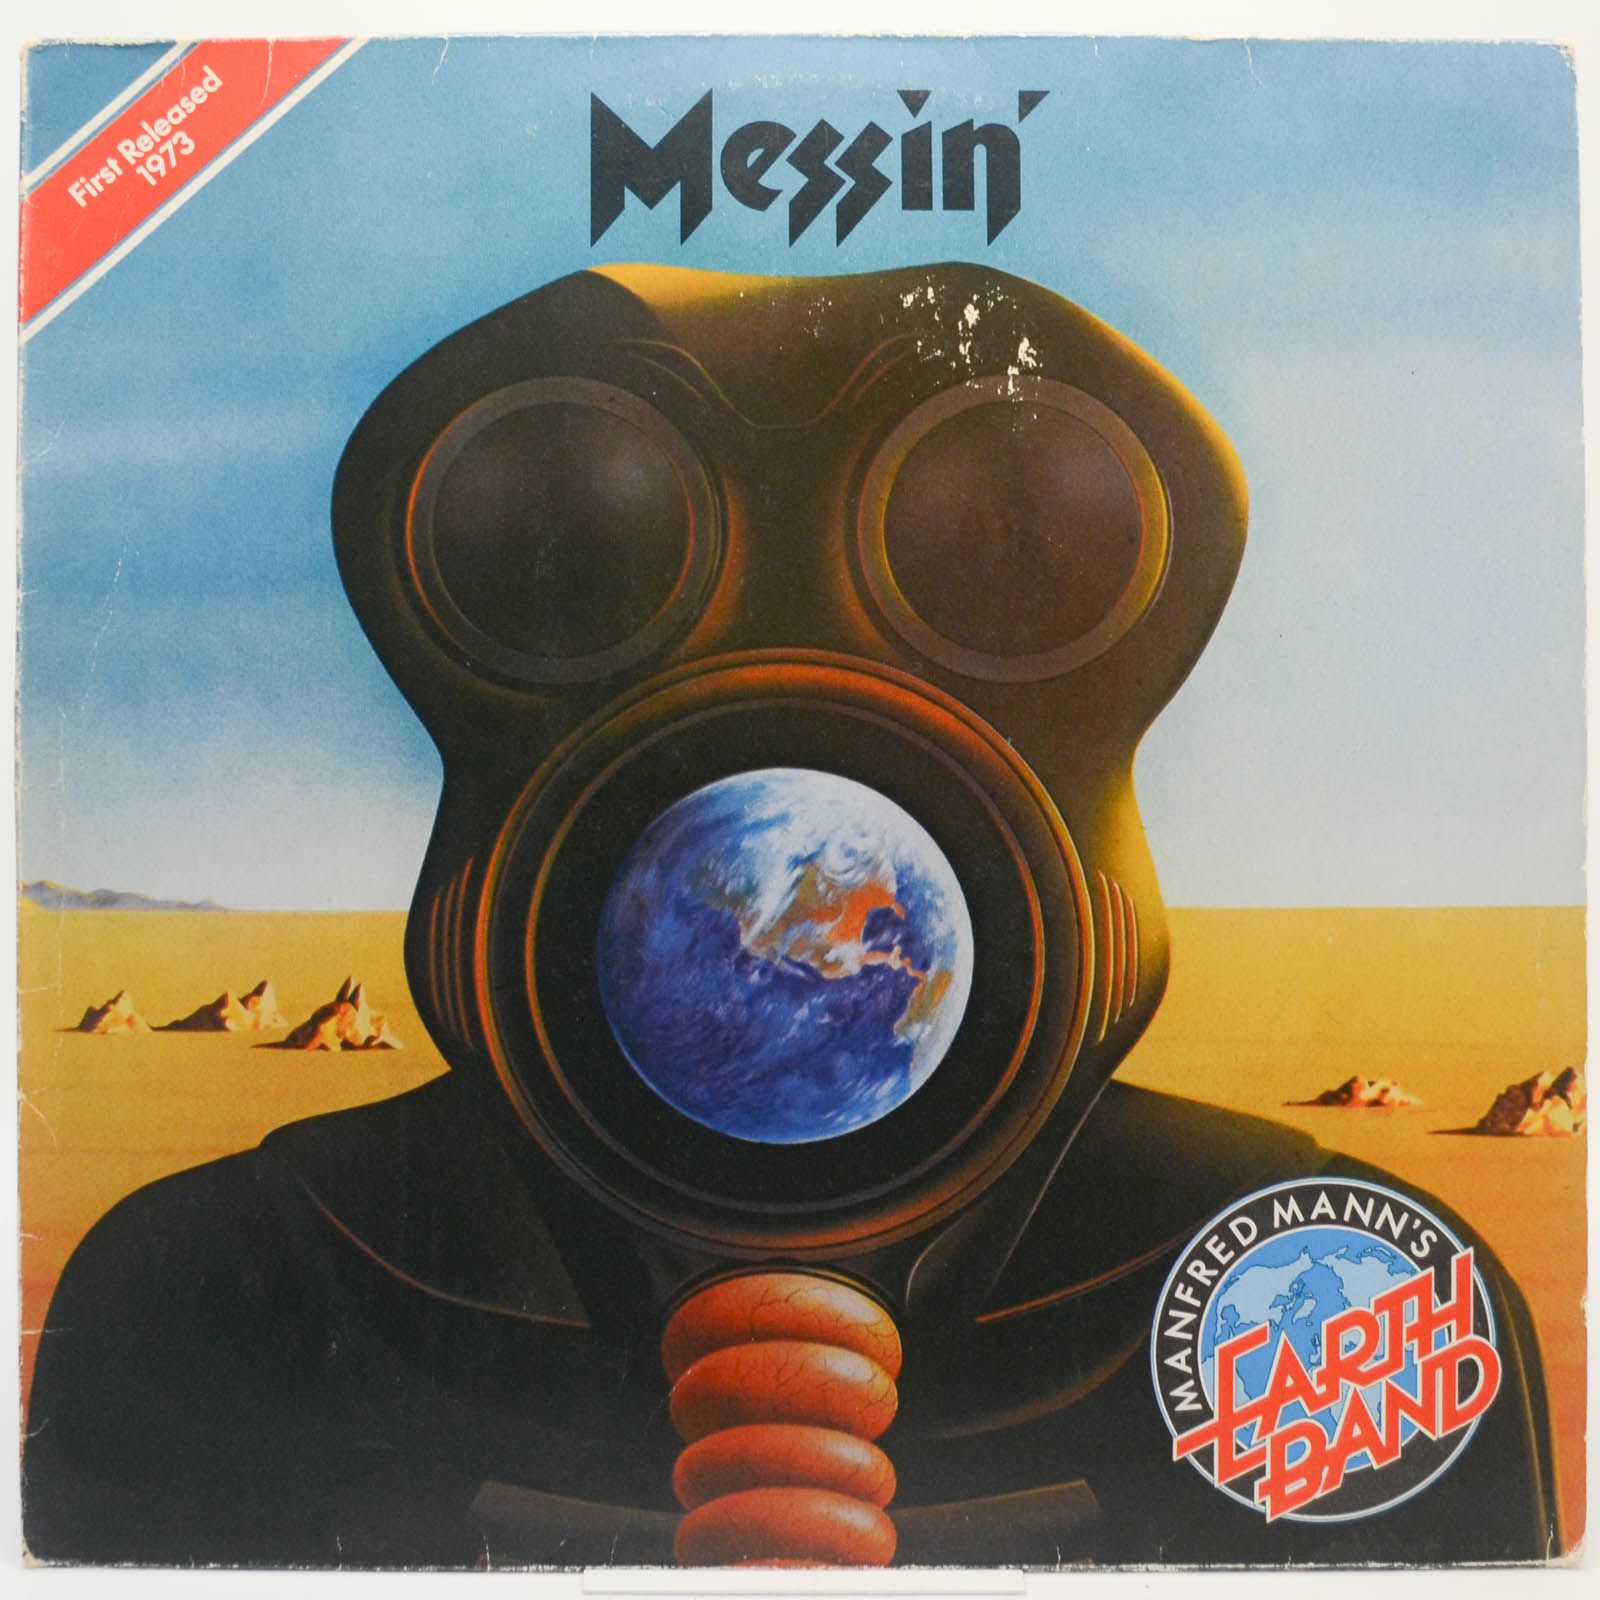 Manfred Mann's Earth Band — Messin', 1973